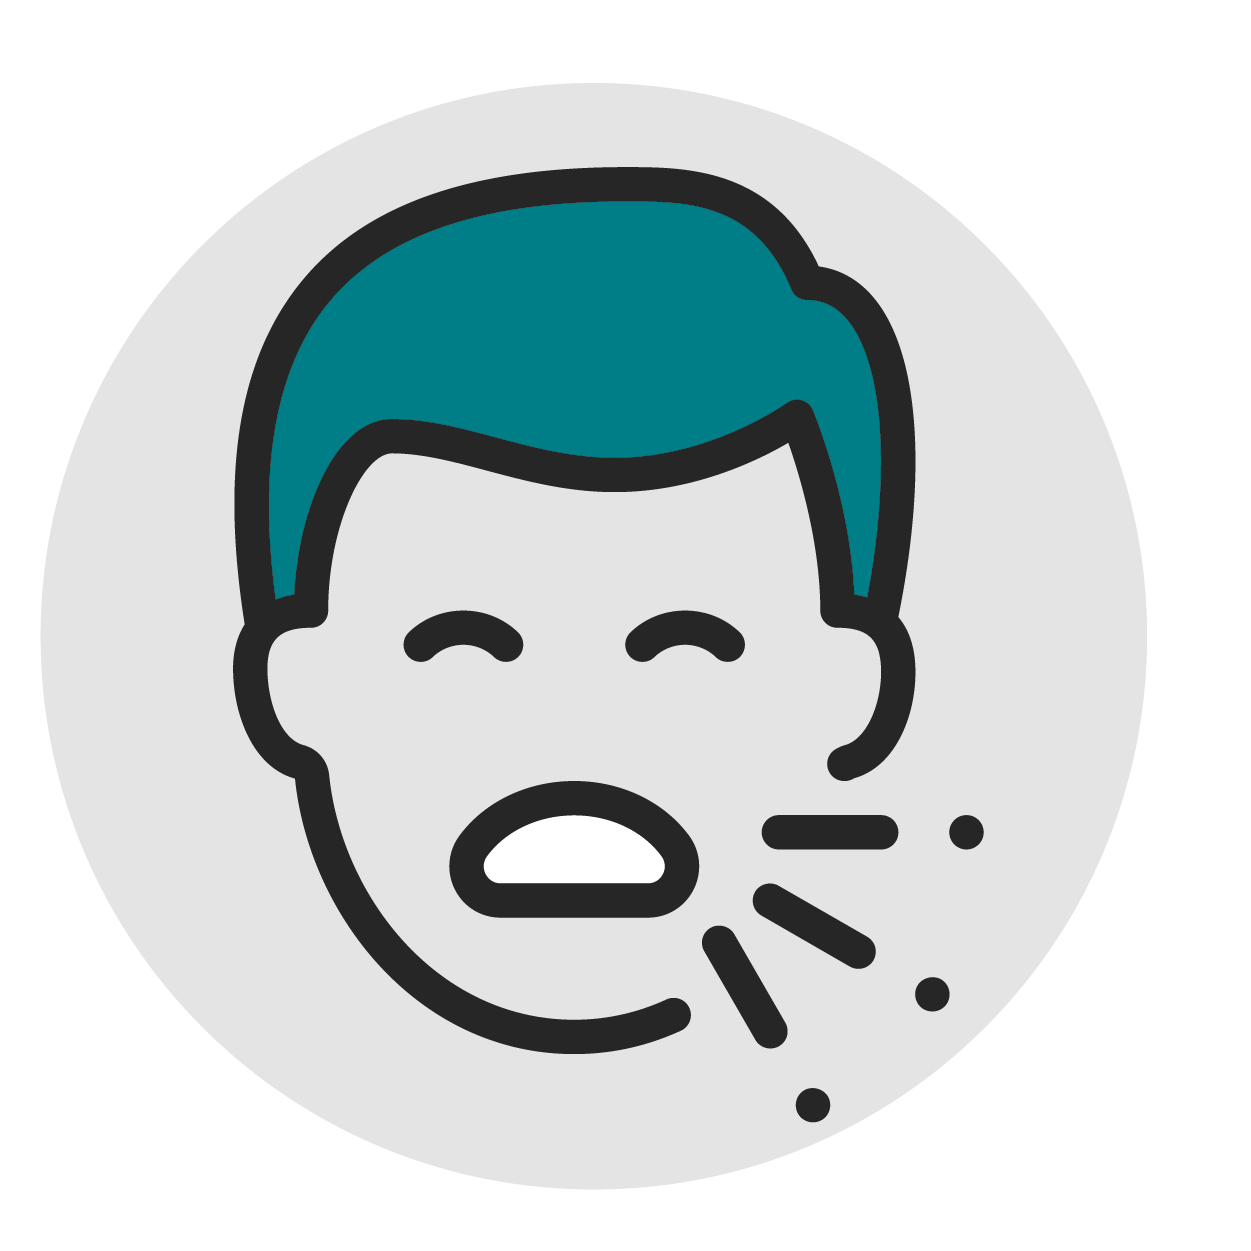 Patient coughing or pneumonia icon